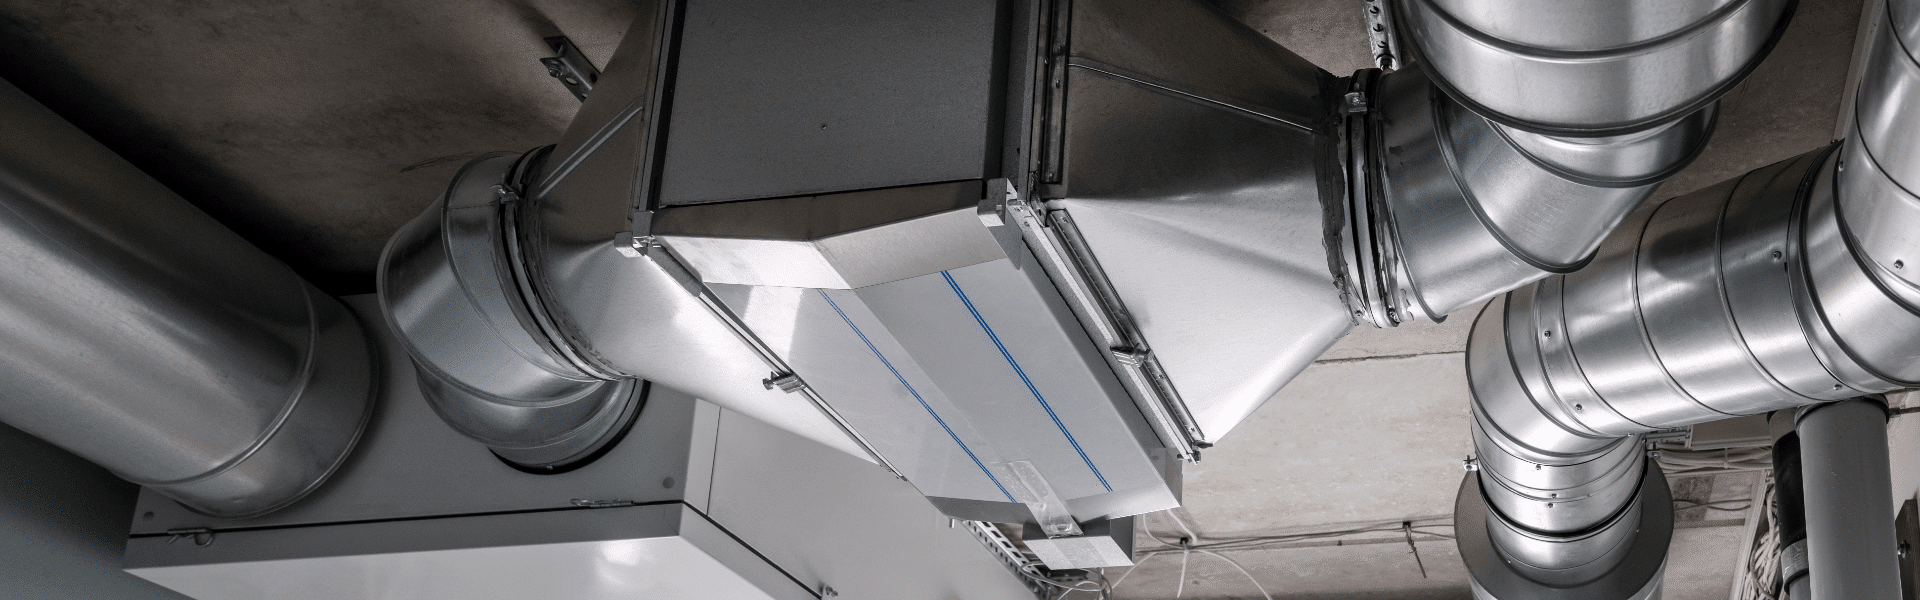 ceiling air duct vents in an hvac system